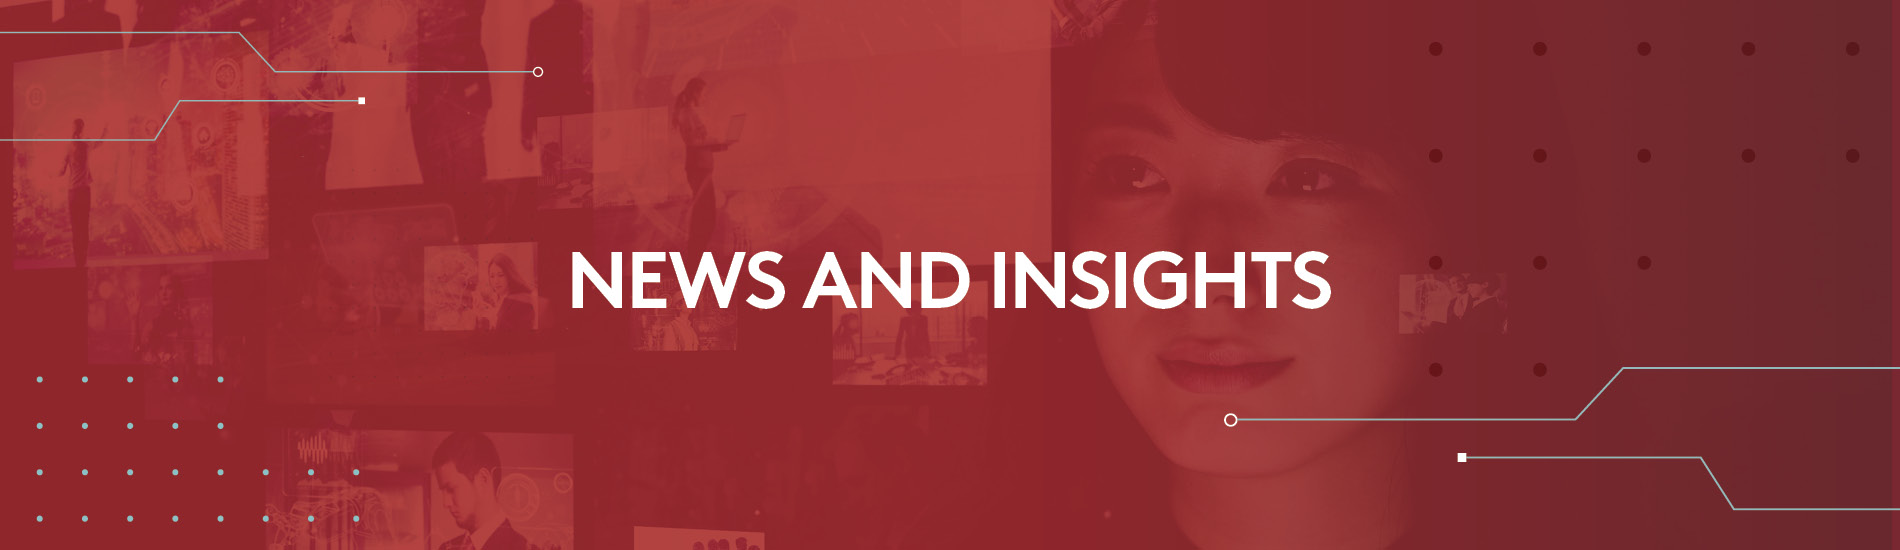 news and insights